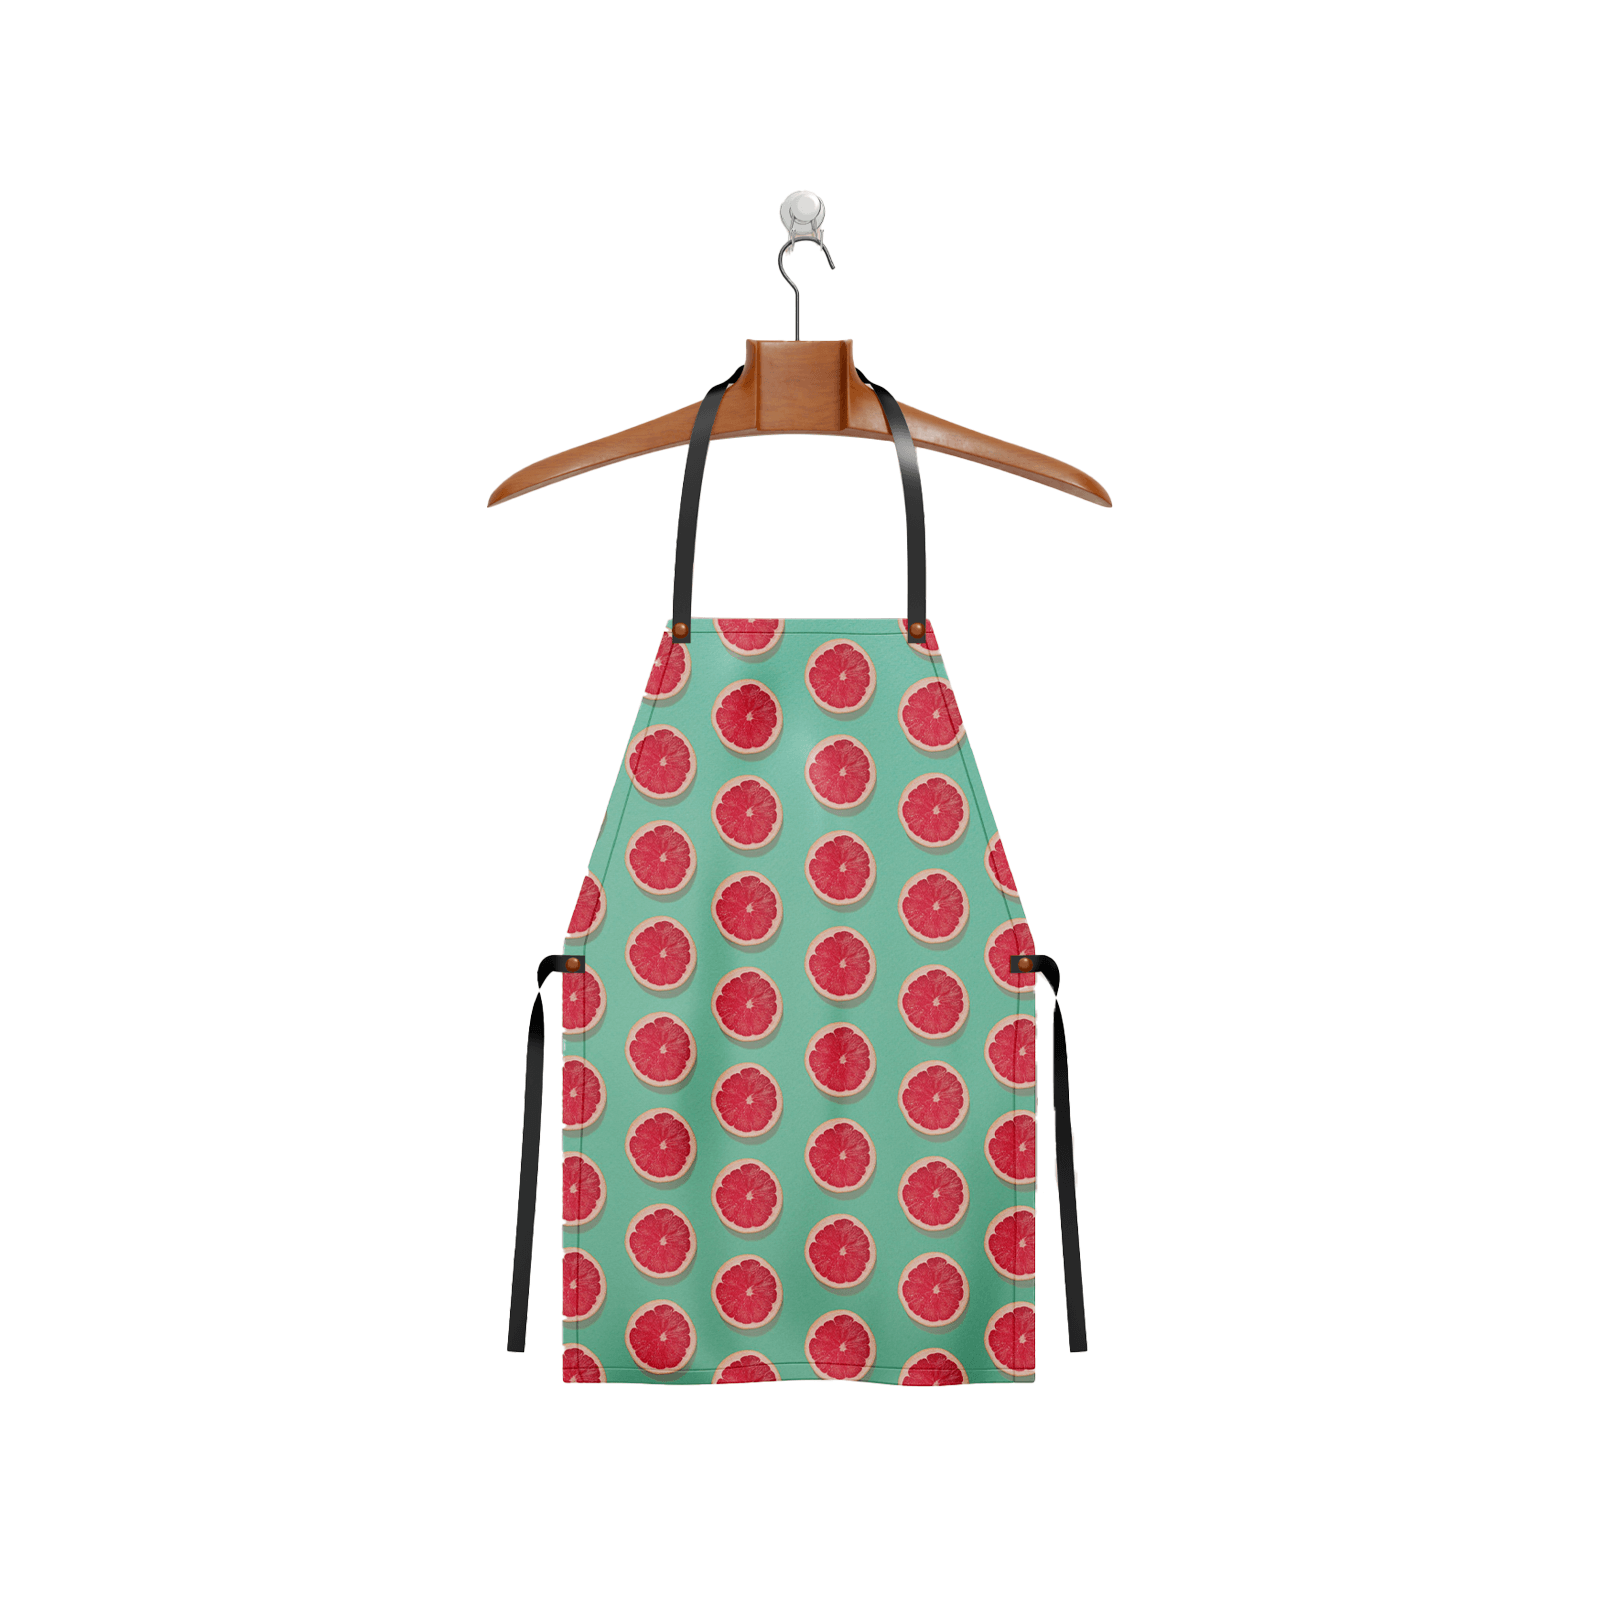 Personalised Queen Apron Gift for Bakers Kitchen Accessories Chef